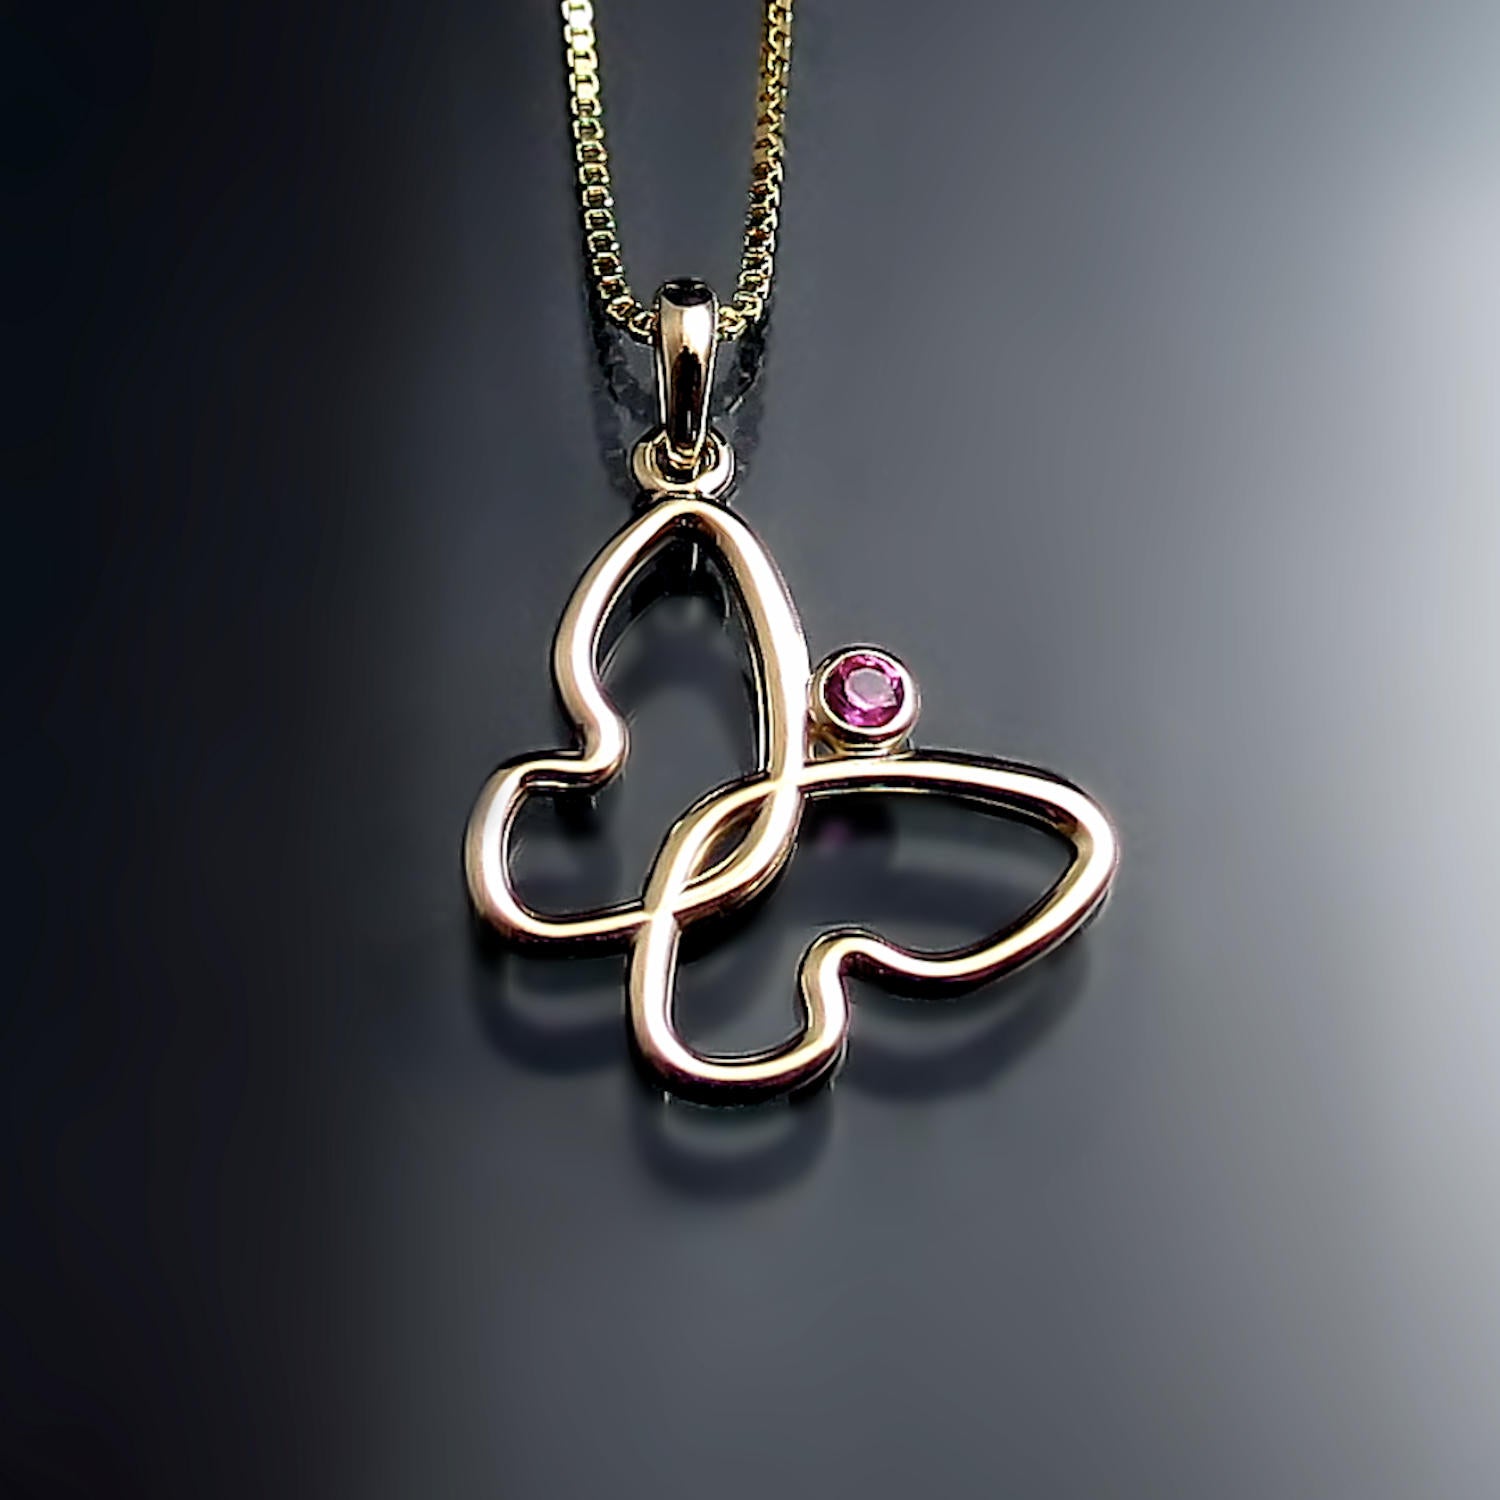 Butterfly pendant with pink sapphire in yellow gold